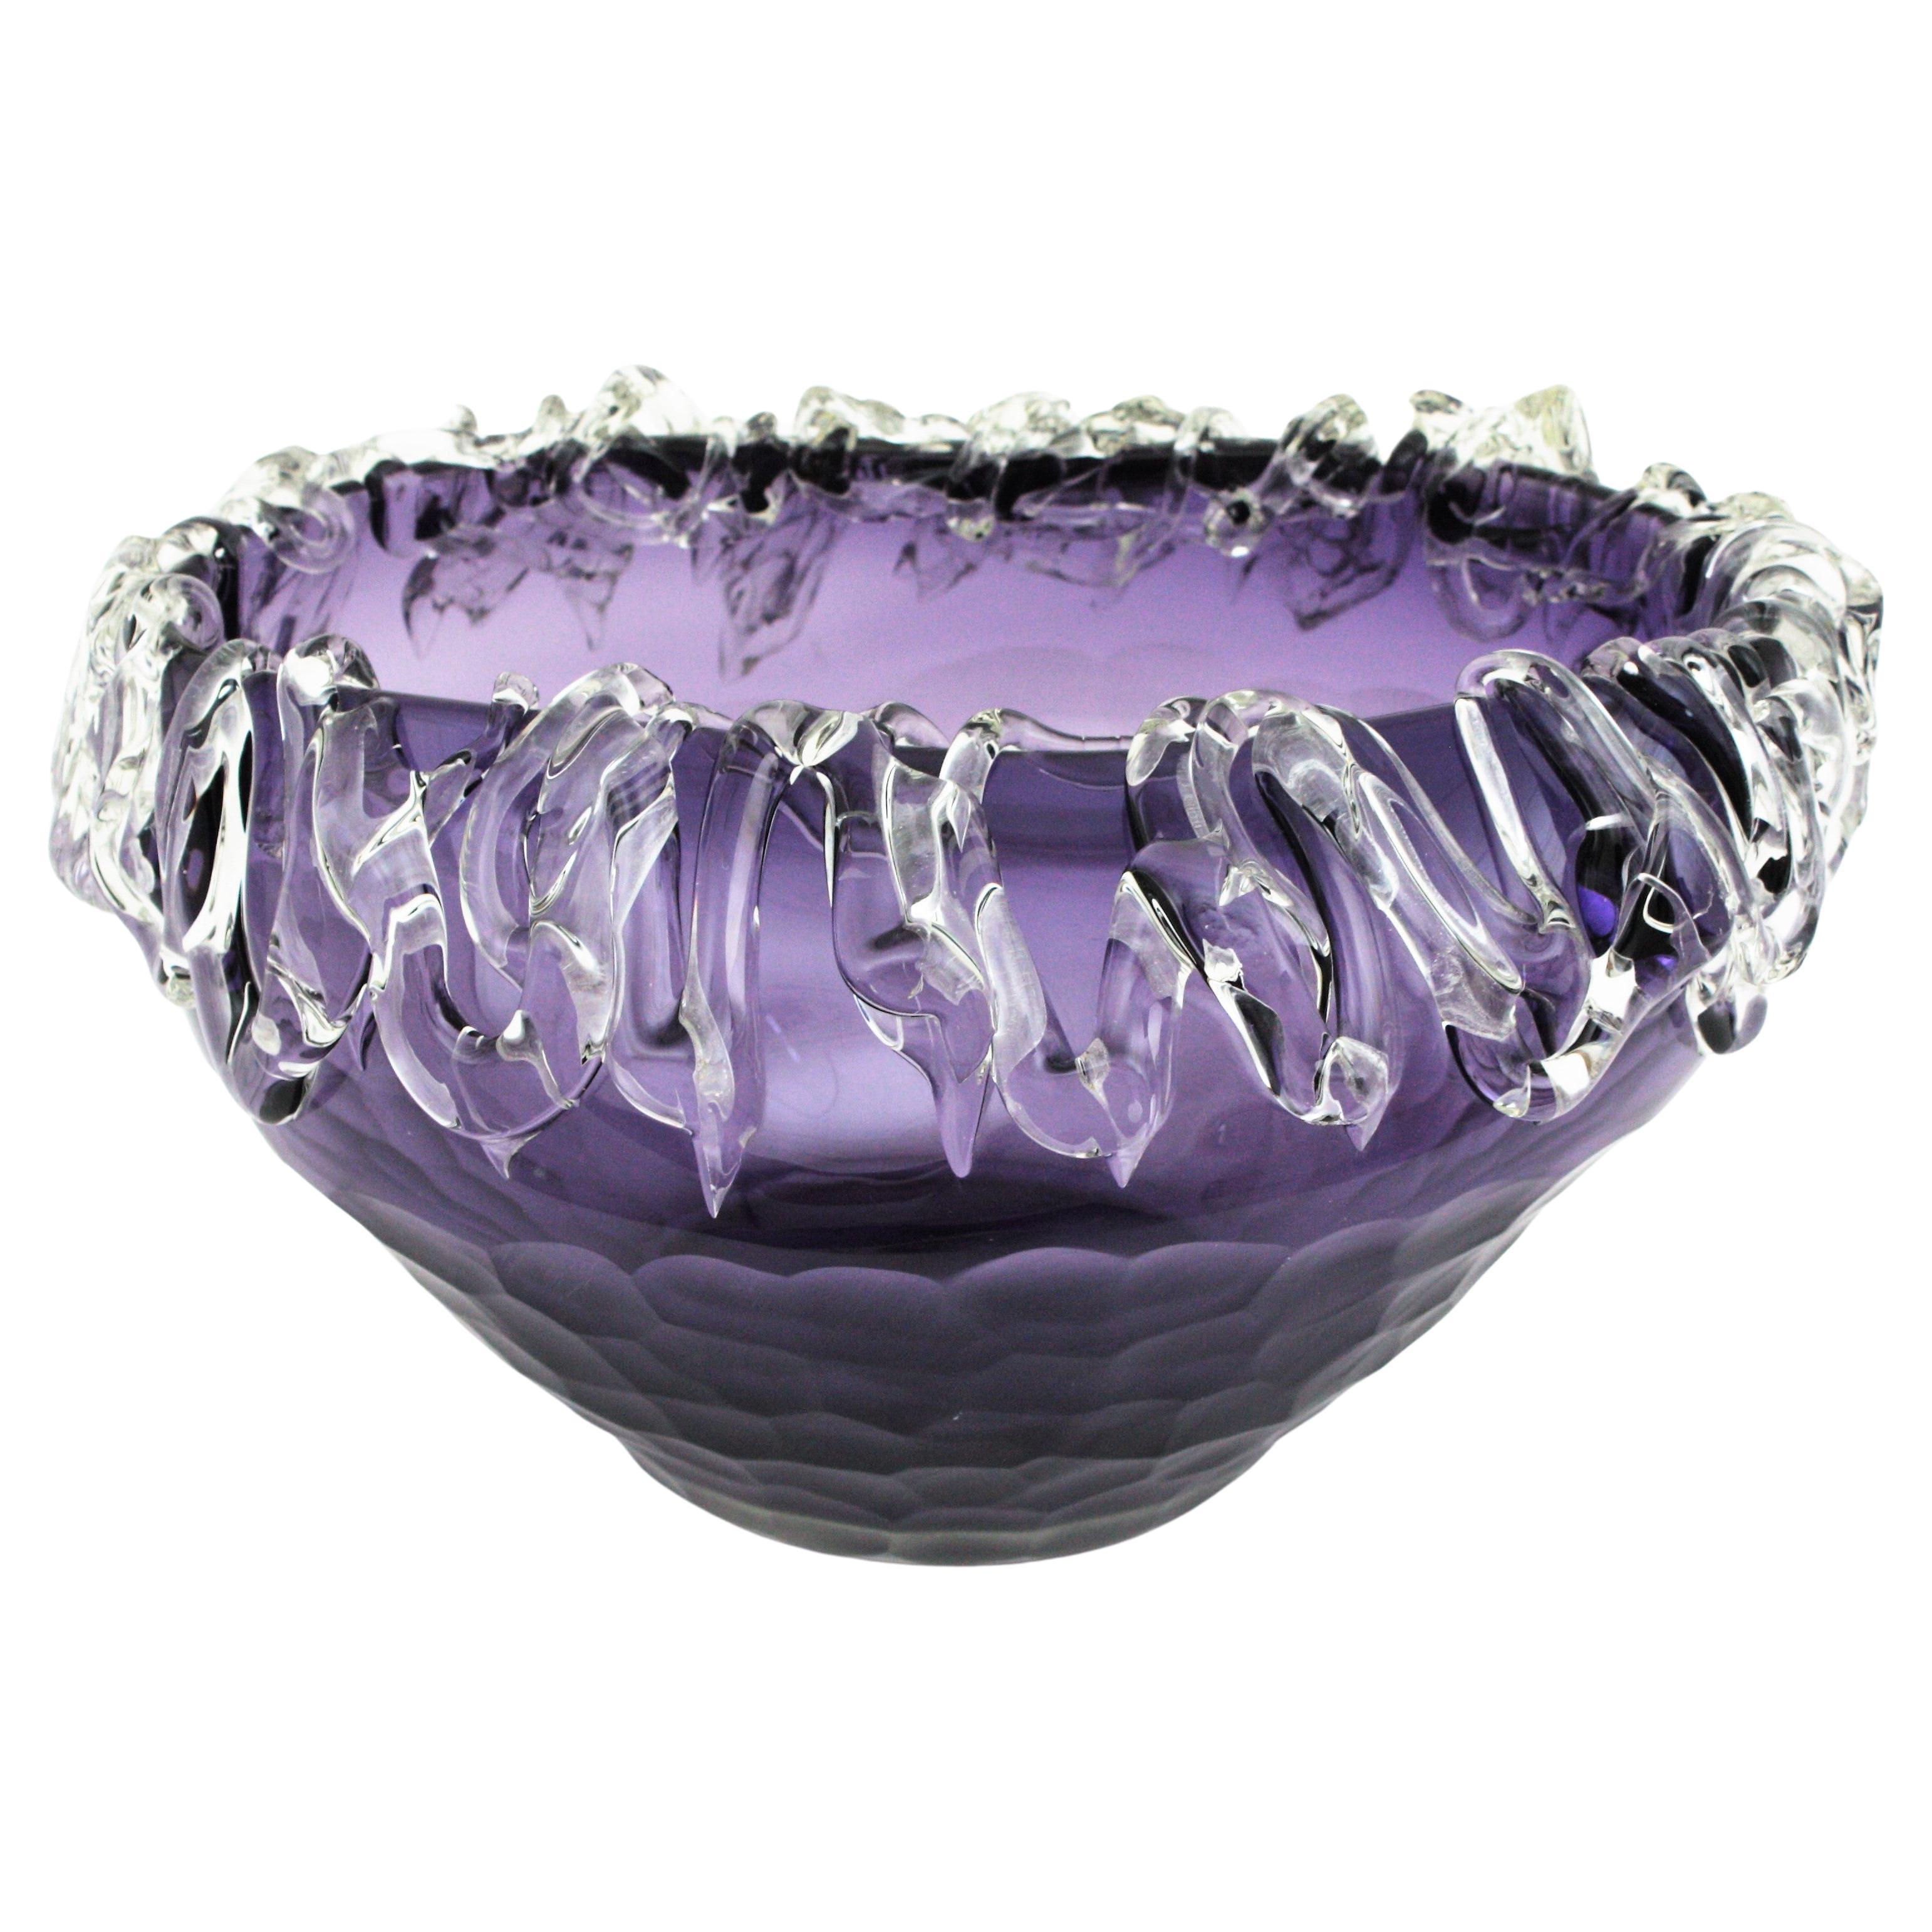 Murano glass centerpiece vase in purple and filigree clear glass rim, Italy, 1950s.
Stunning blown glass purple centerpiece with faceted body and heavily adorned rim by applied clear glass free-from details. 
Eye-catching color and rare design.
This